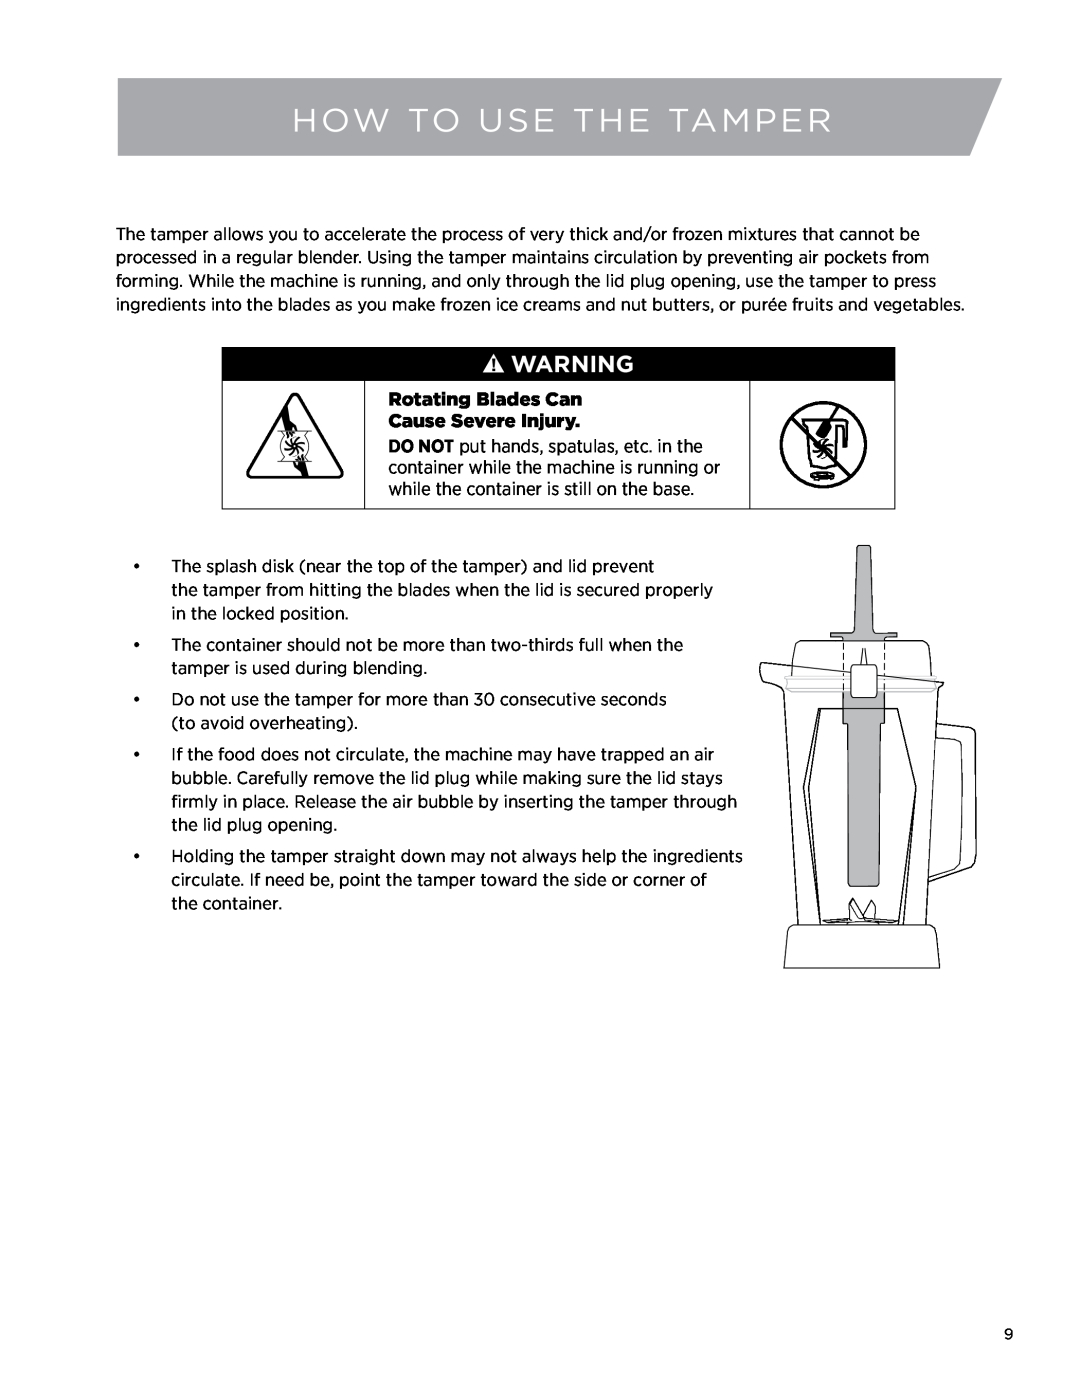 Vita-Mix 5200 owner manual HOW TO USE THE tamper, Rotating Blades Can Cause Severe Injury 